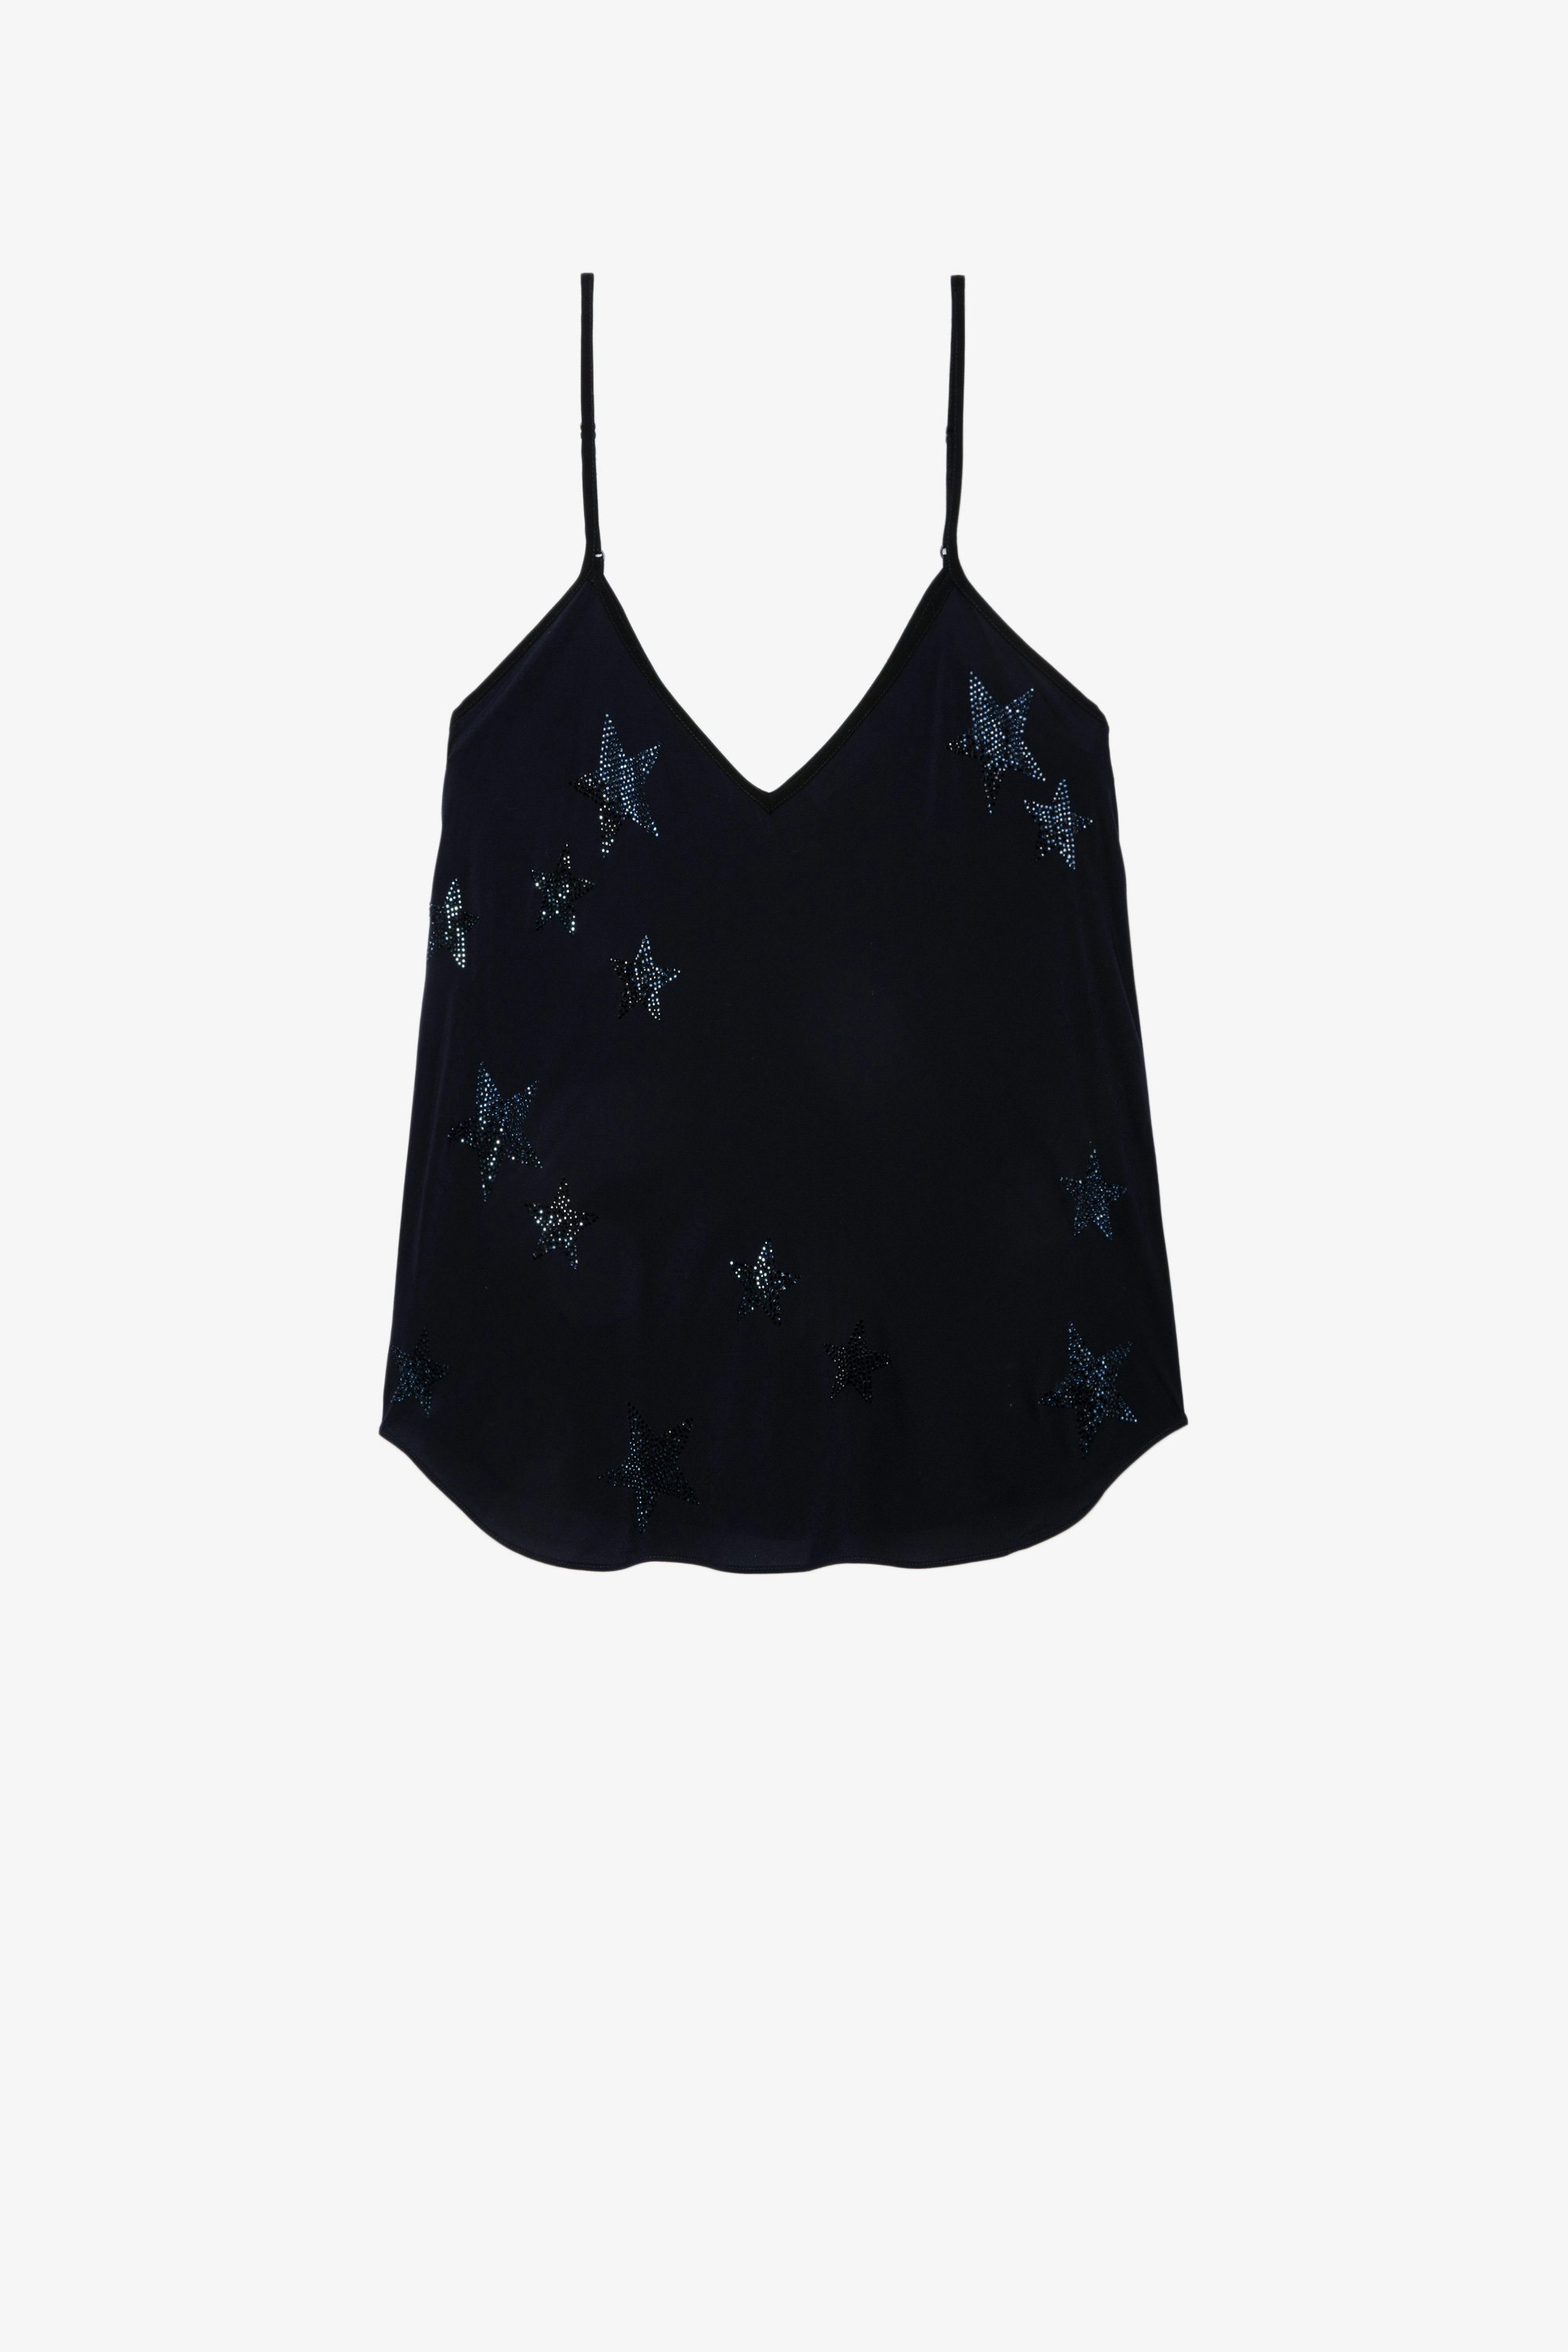 Casel Soft Strass Camisole Women’s navy blue camisole with thin straps and crystal-embellished stars